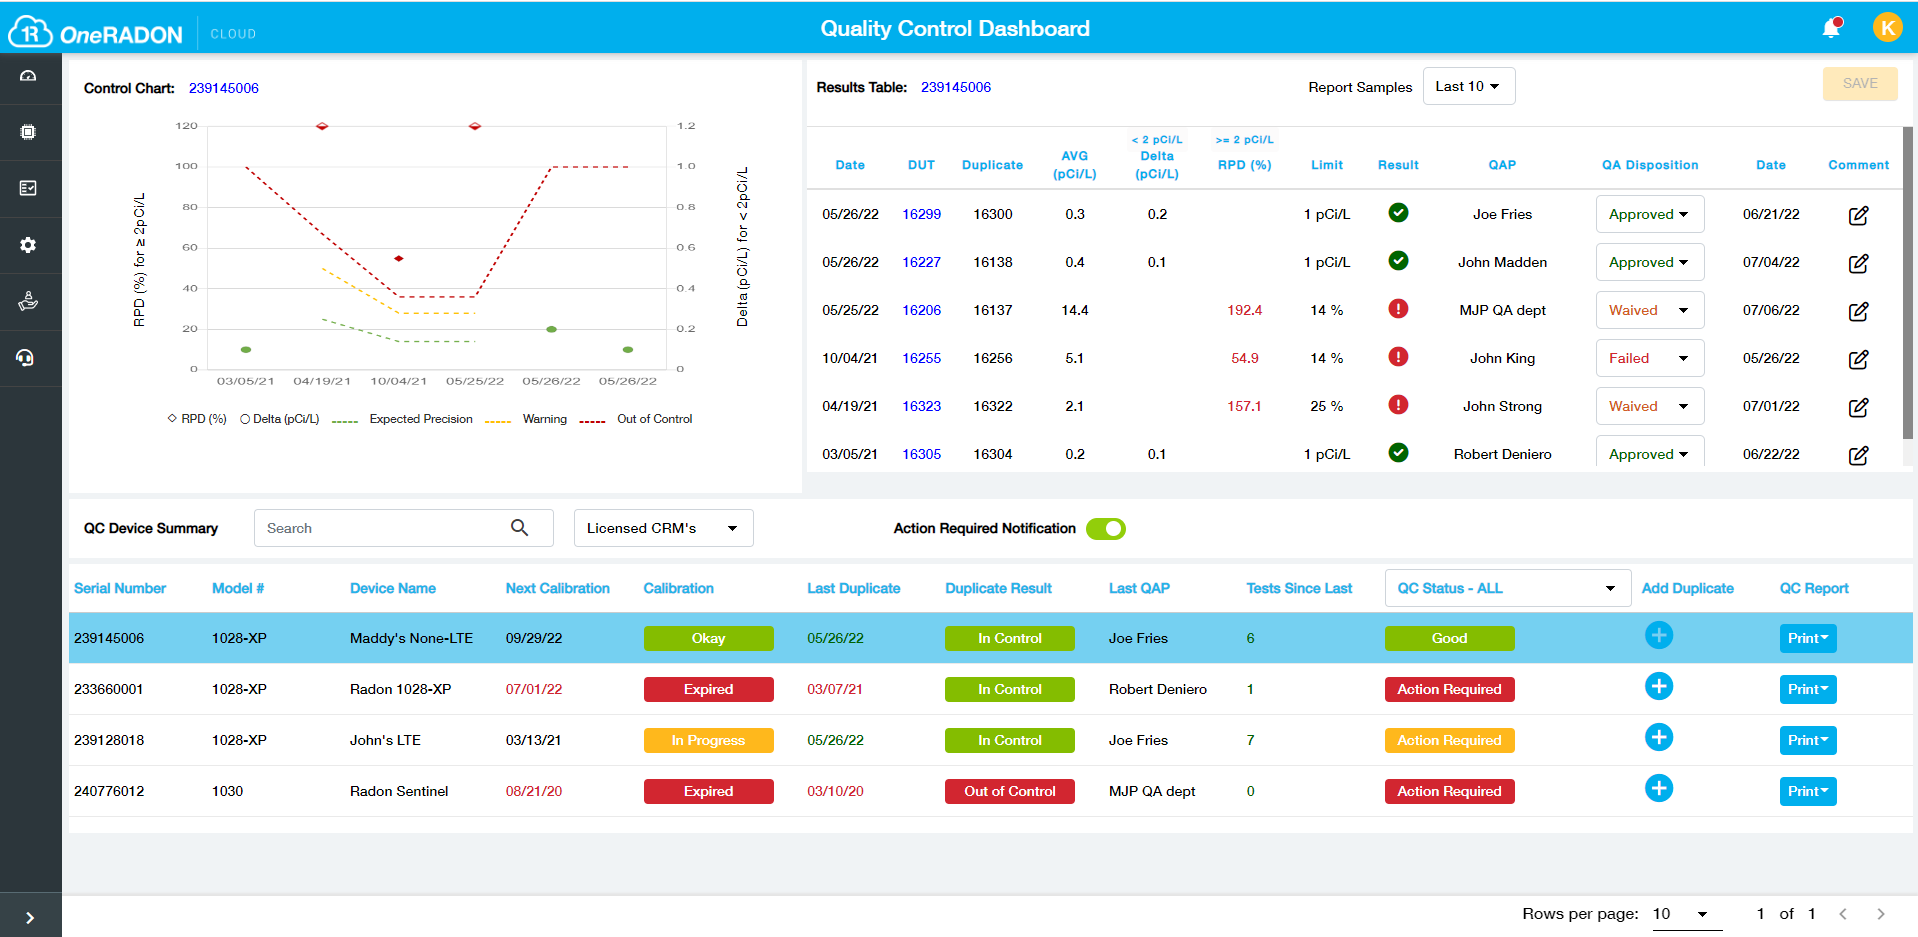 ANSI/AARST Compliant Reporting and QC with OneRADON Cloud